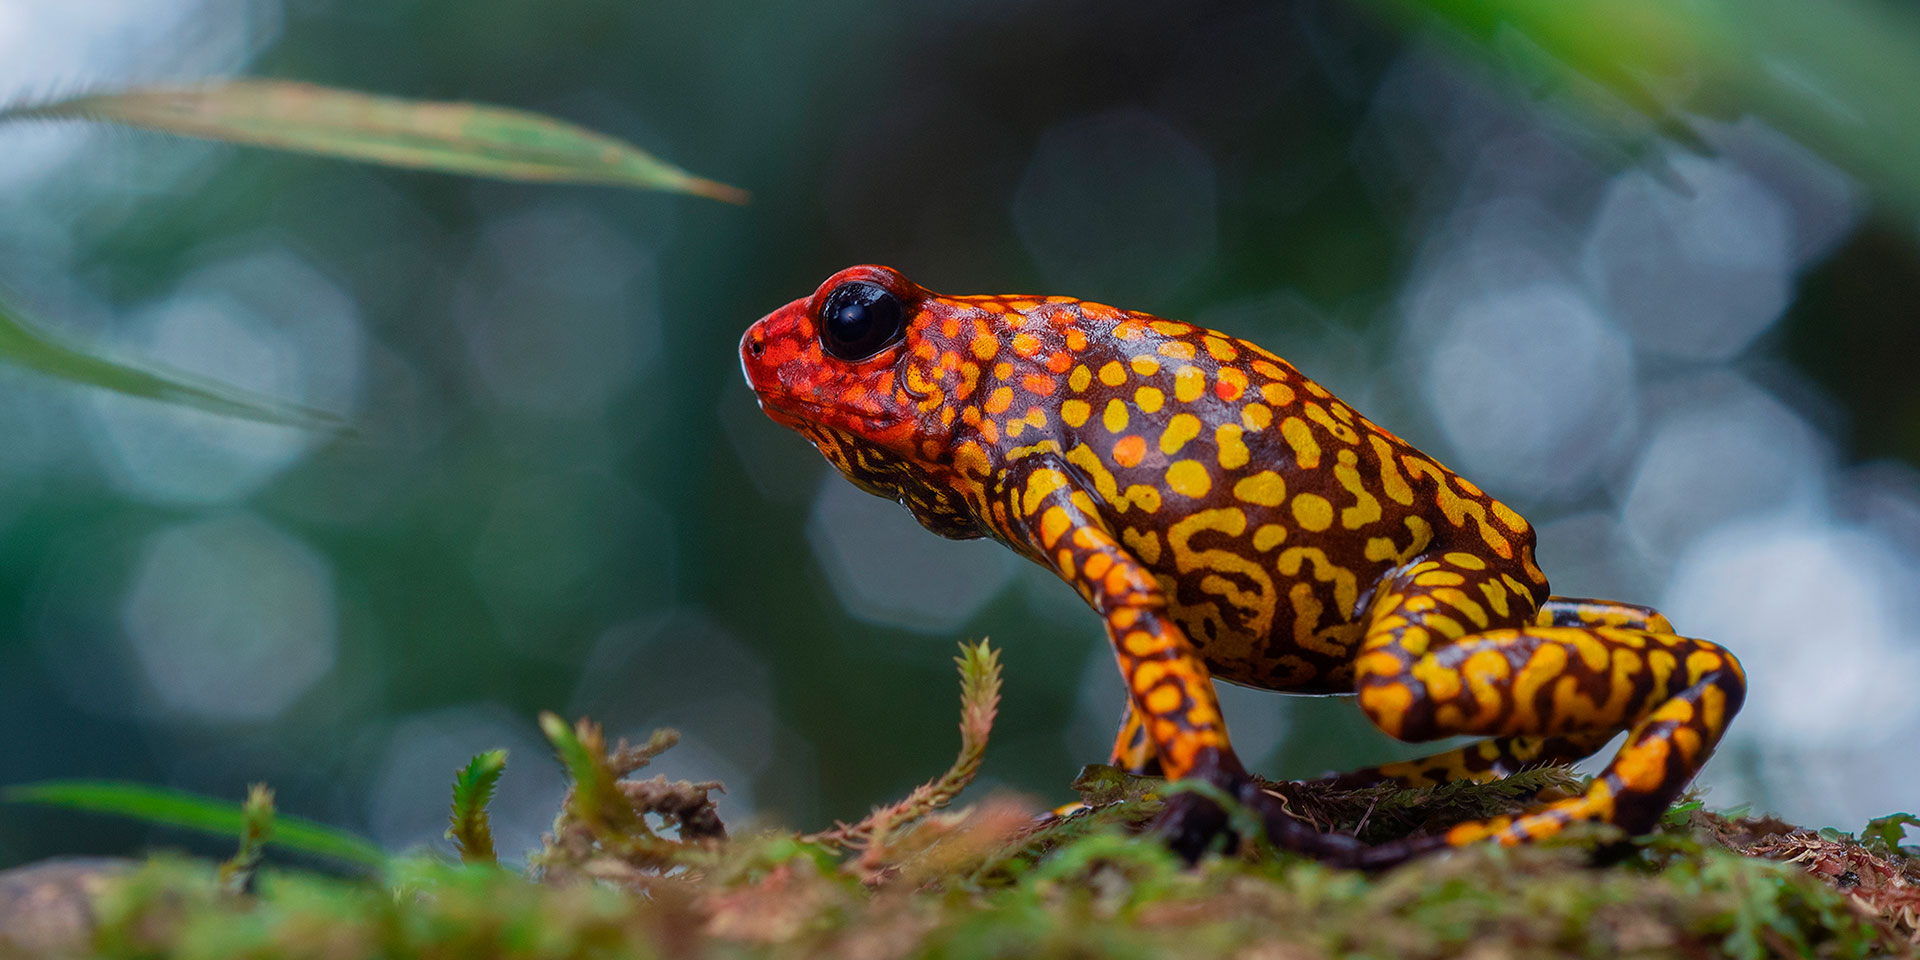 Neoselva-Oophaga-histrionica-anchicayensis-Poison-frog-Colombia-Valle-del-Cauca-Dendrobatidae-Herping-Macro-Tour-Web